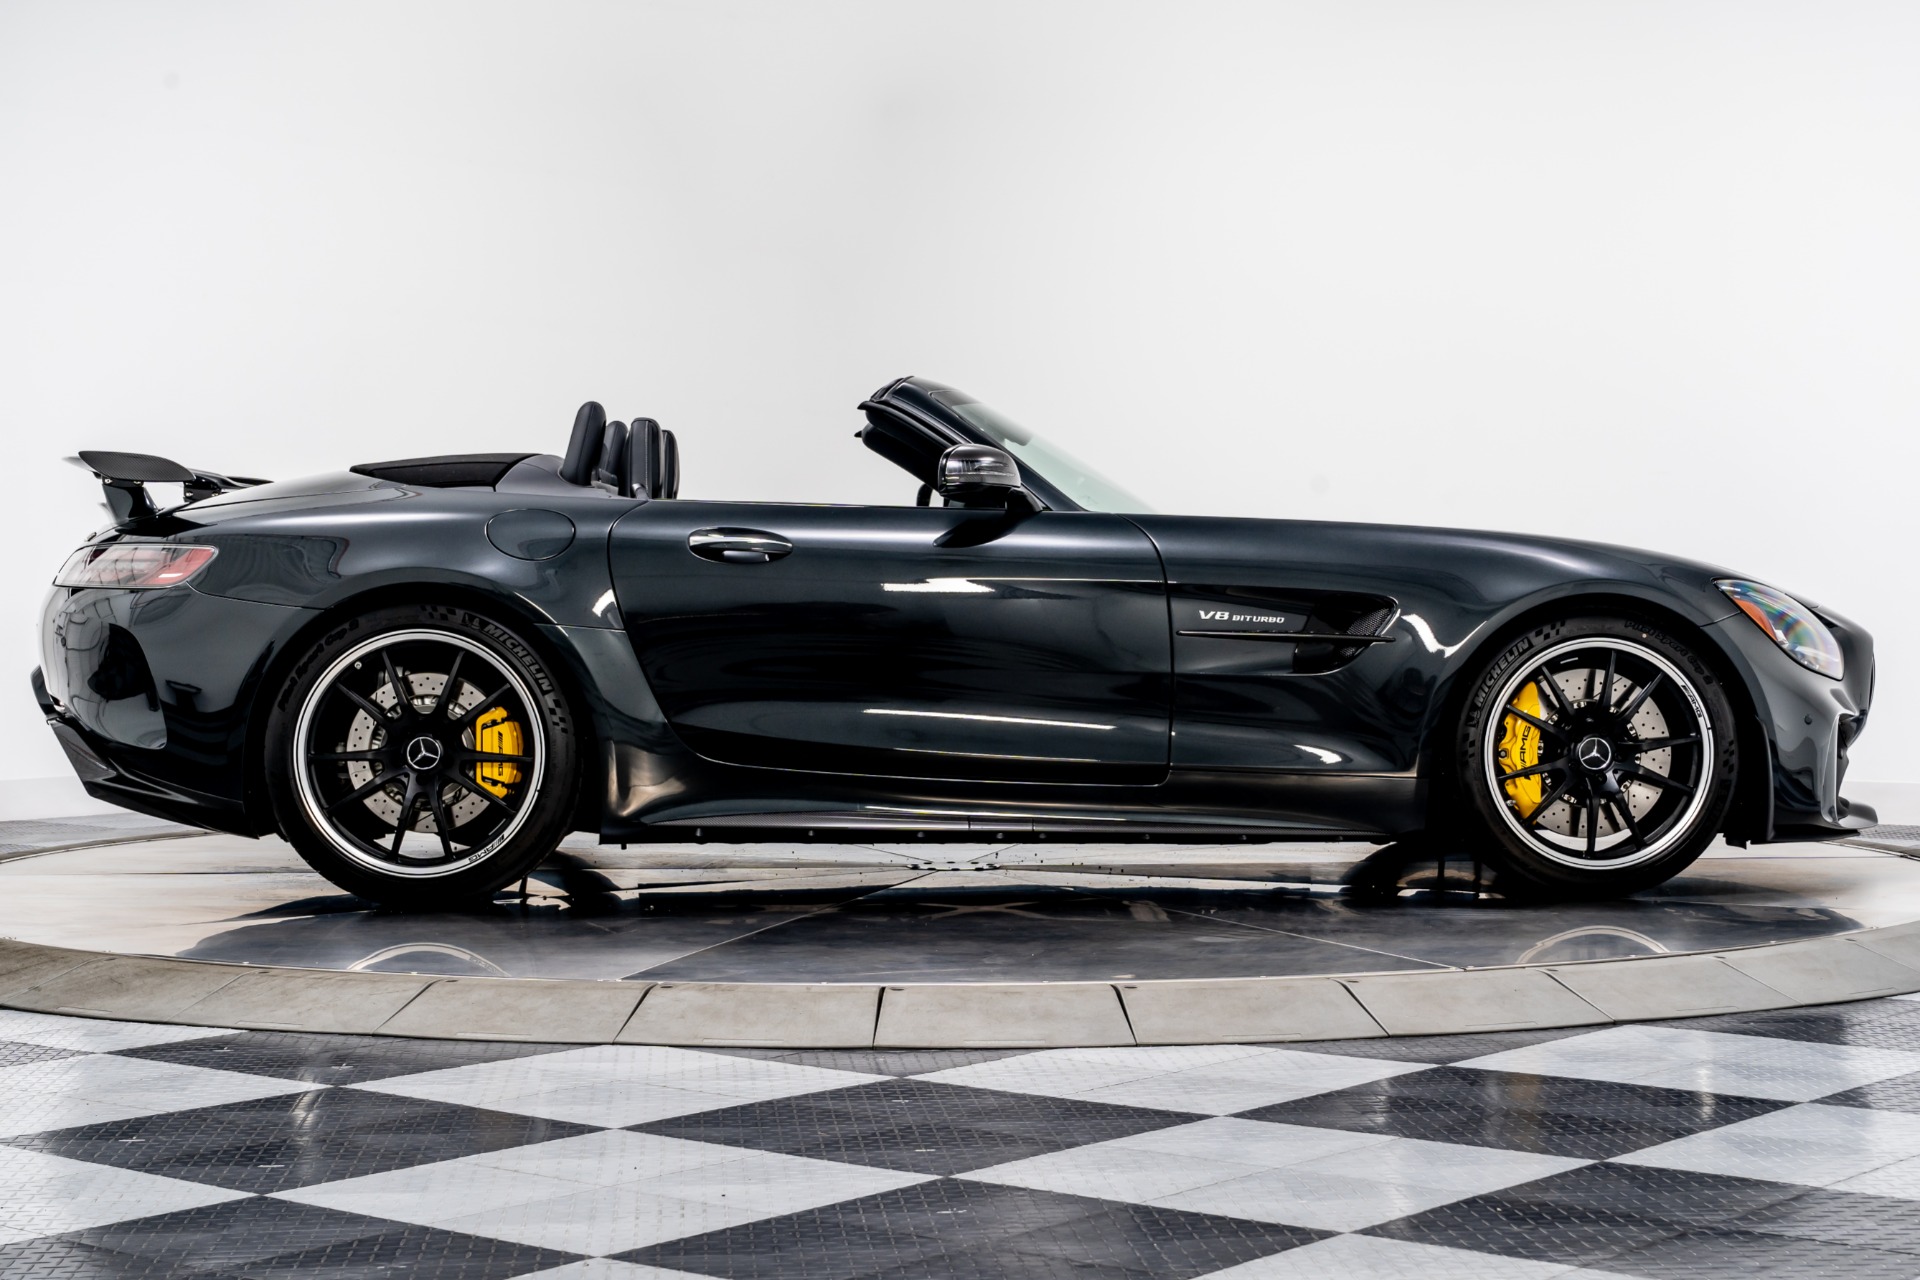 Used Mercedes Benz Amg Gt R Roadster For Sale Sold Marshall Goldman Cleveland Stock W